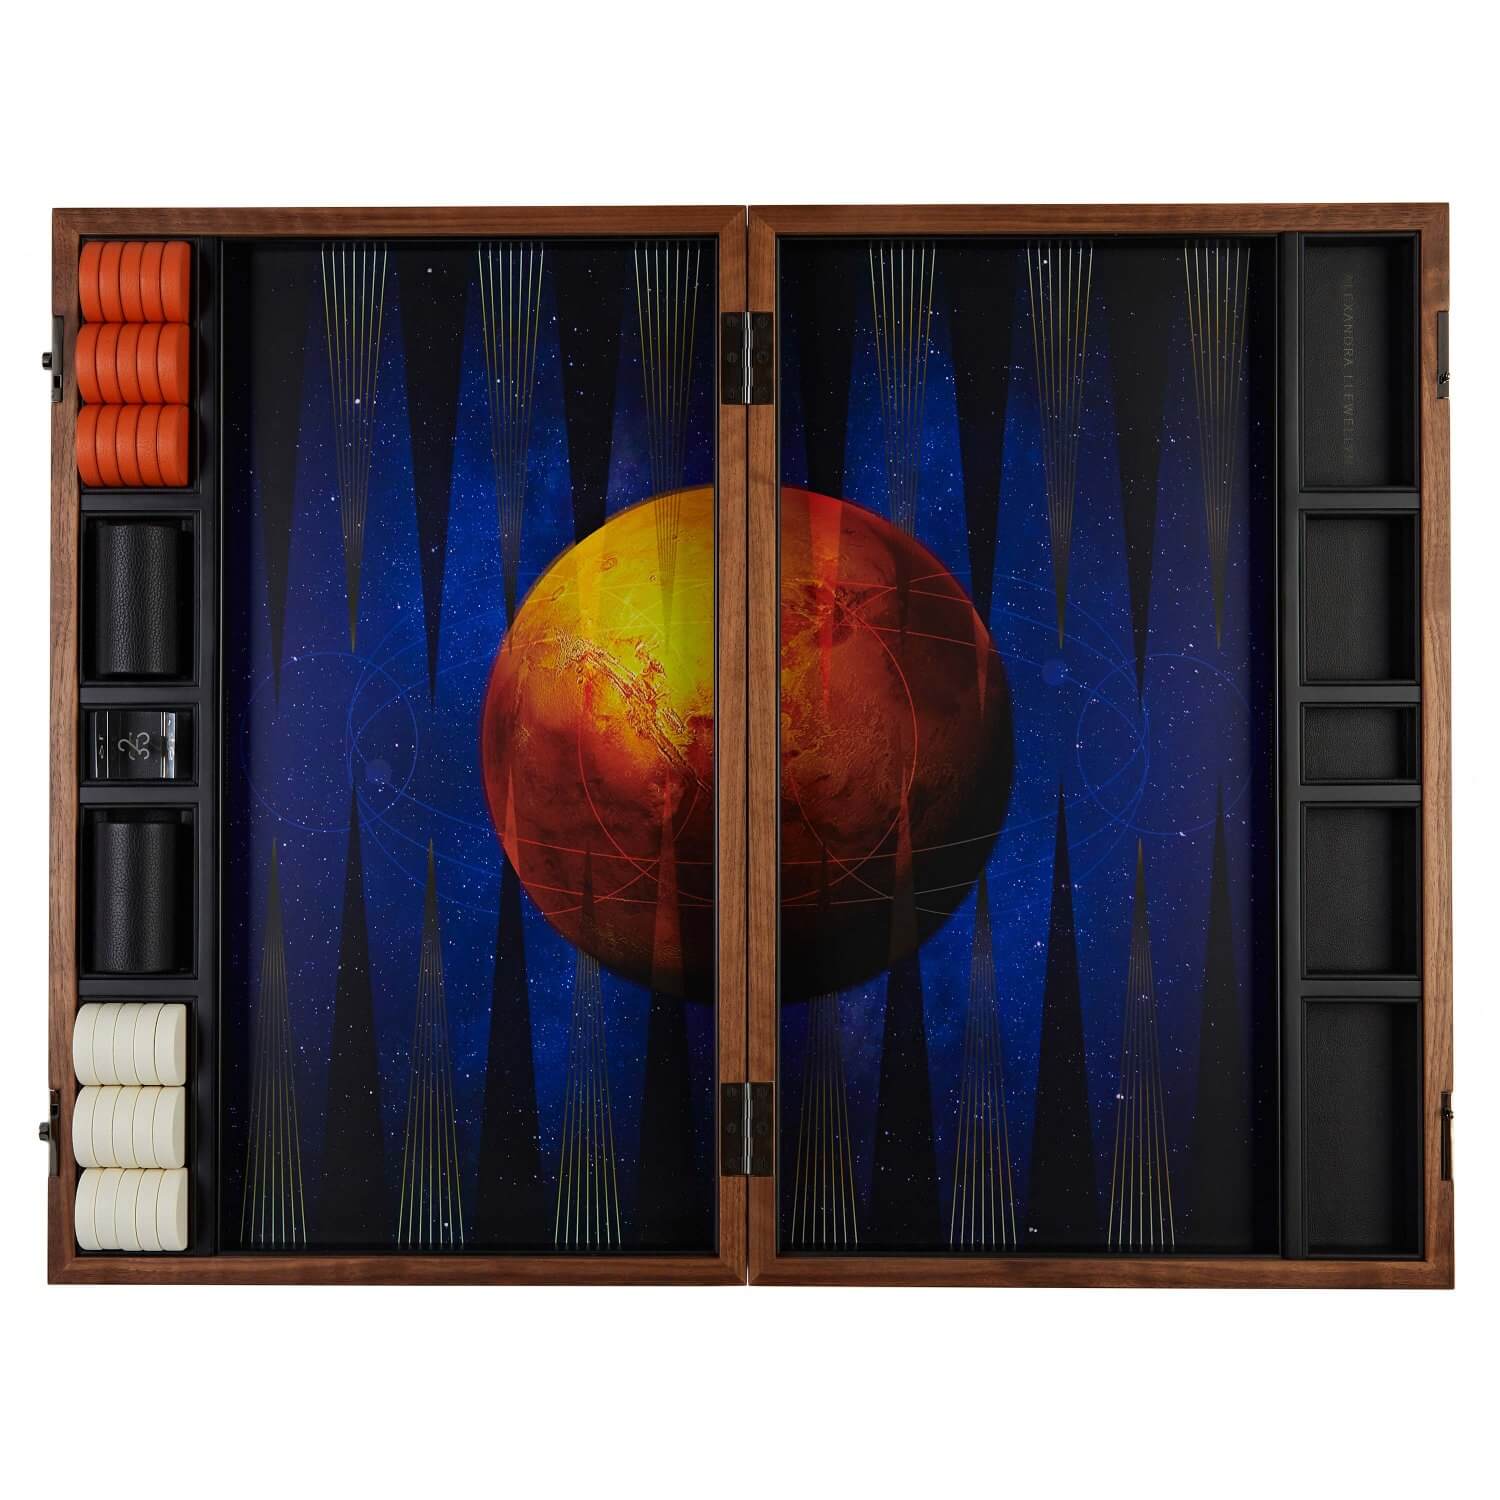 A bespoke 'Mars' and space design Photographic backgammon board